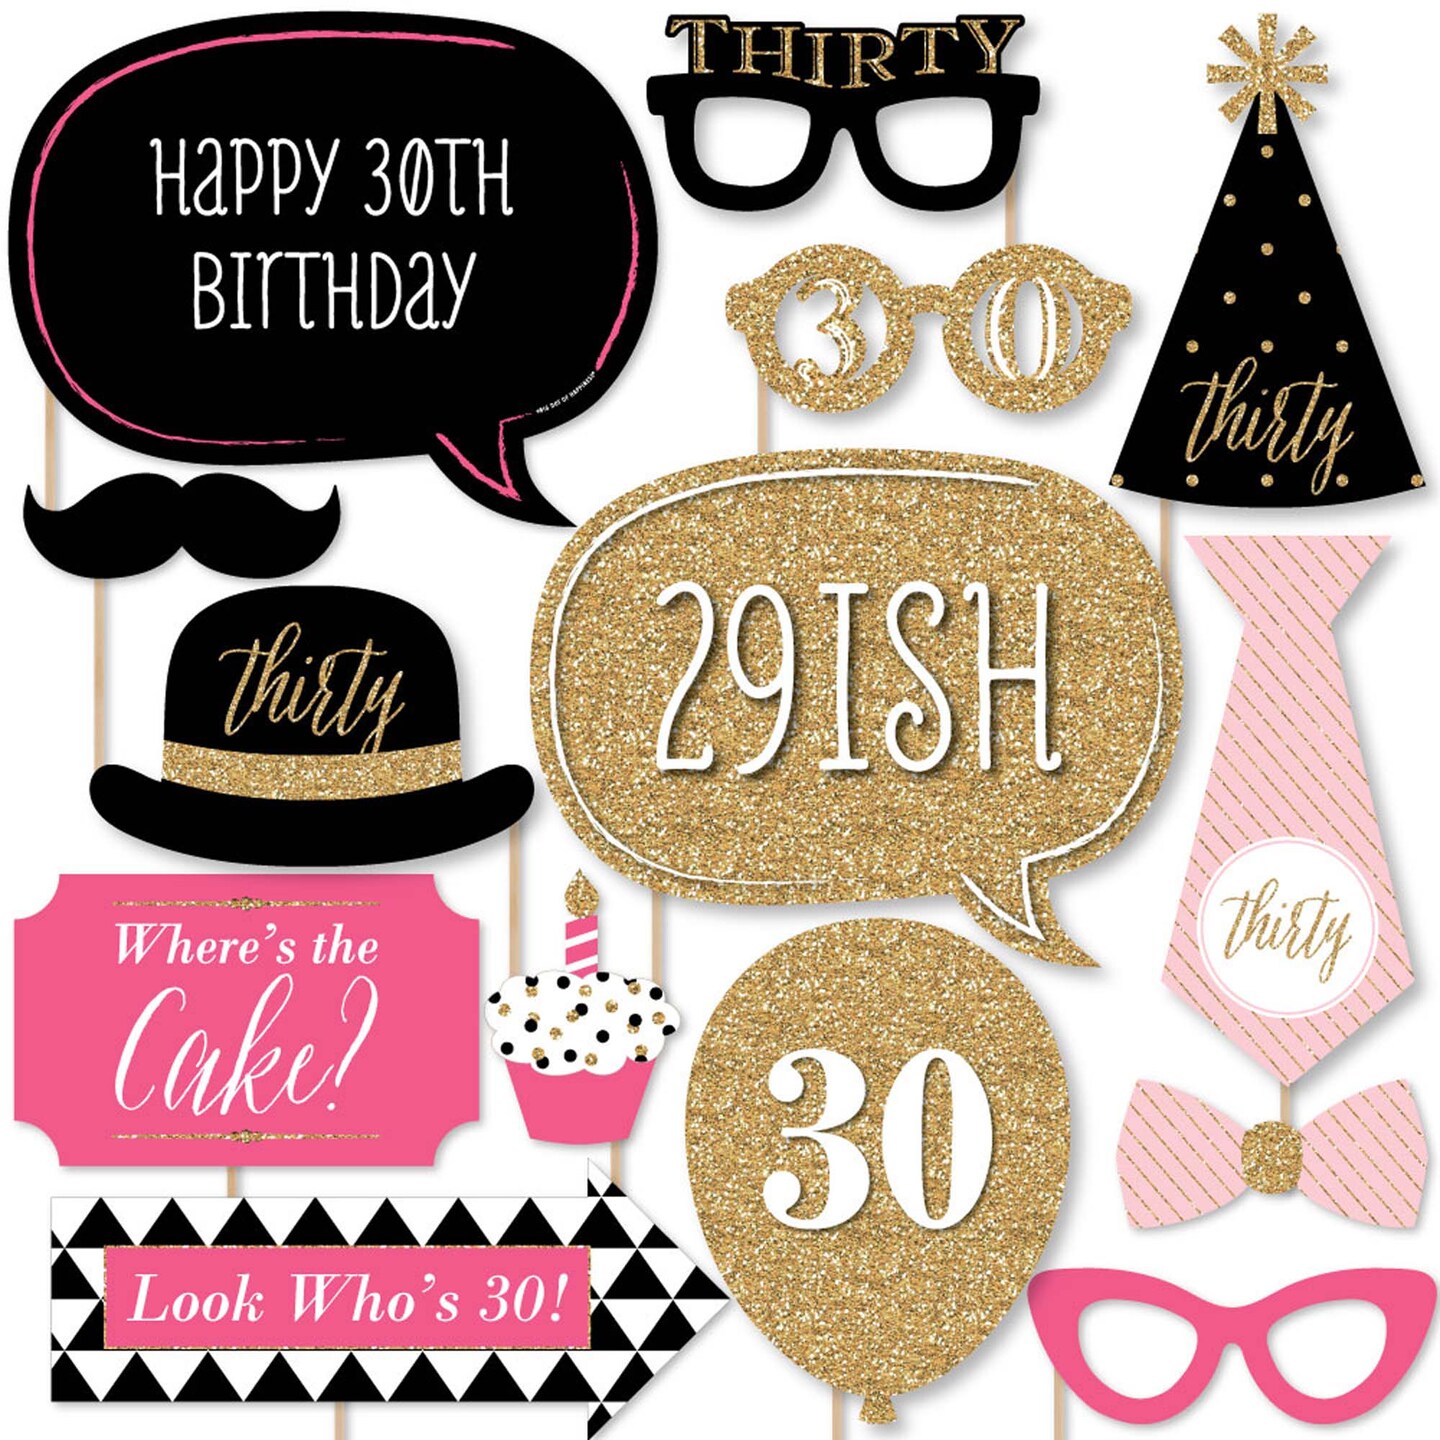 Big Dot of Happiness Chic 30th Birthday - Pink, Black and Gold - Birthday Photo Booth Props Kit - 20 Count